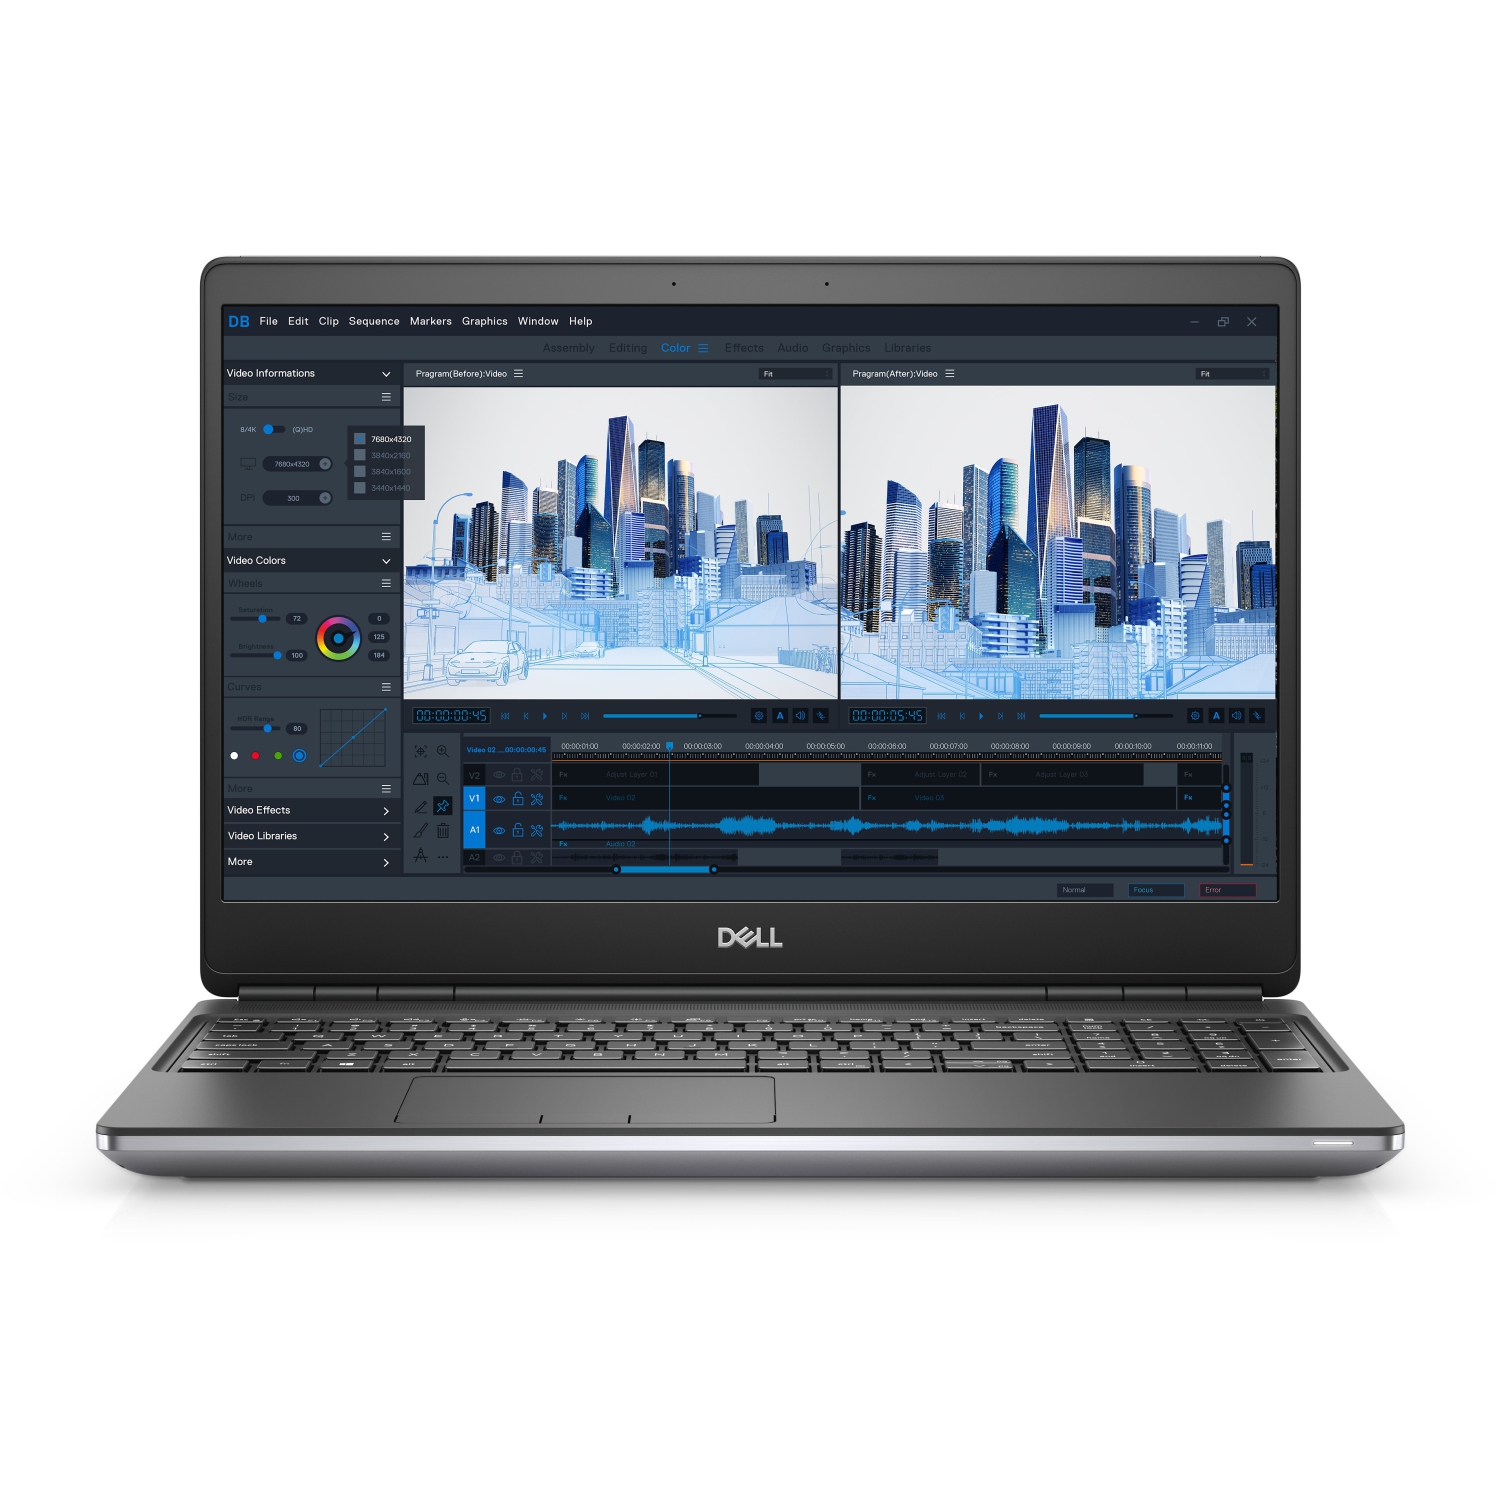 Refurbished (Excellent) - Dell Precision 7000 7560 Workstation Laptop (2021), 15.6" FHD, Core i9, 4TB SSD, 64GB RAM, RTX A5000, 8 Cores @ 5 GHz, 11th Gen CPU Certified